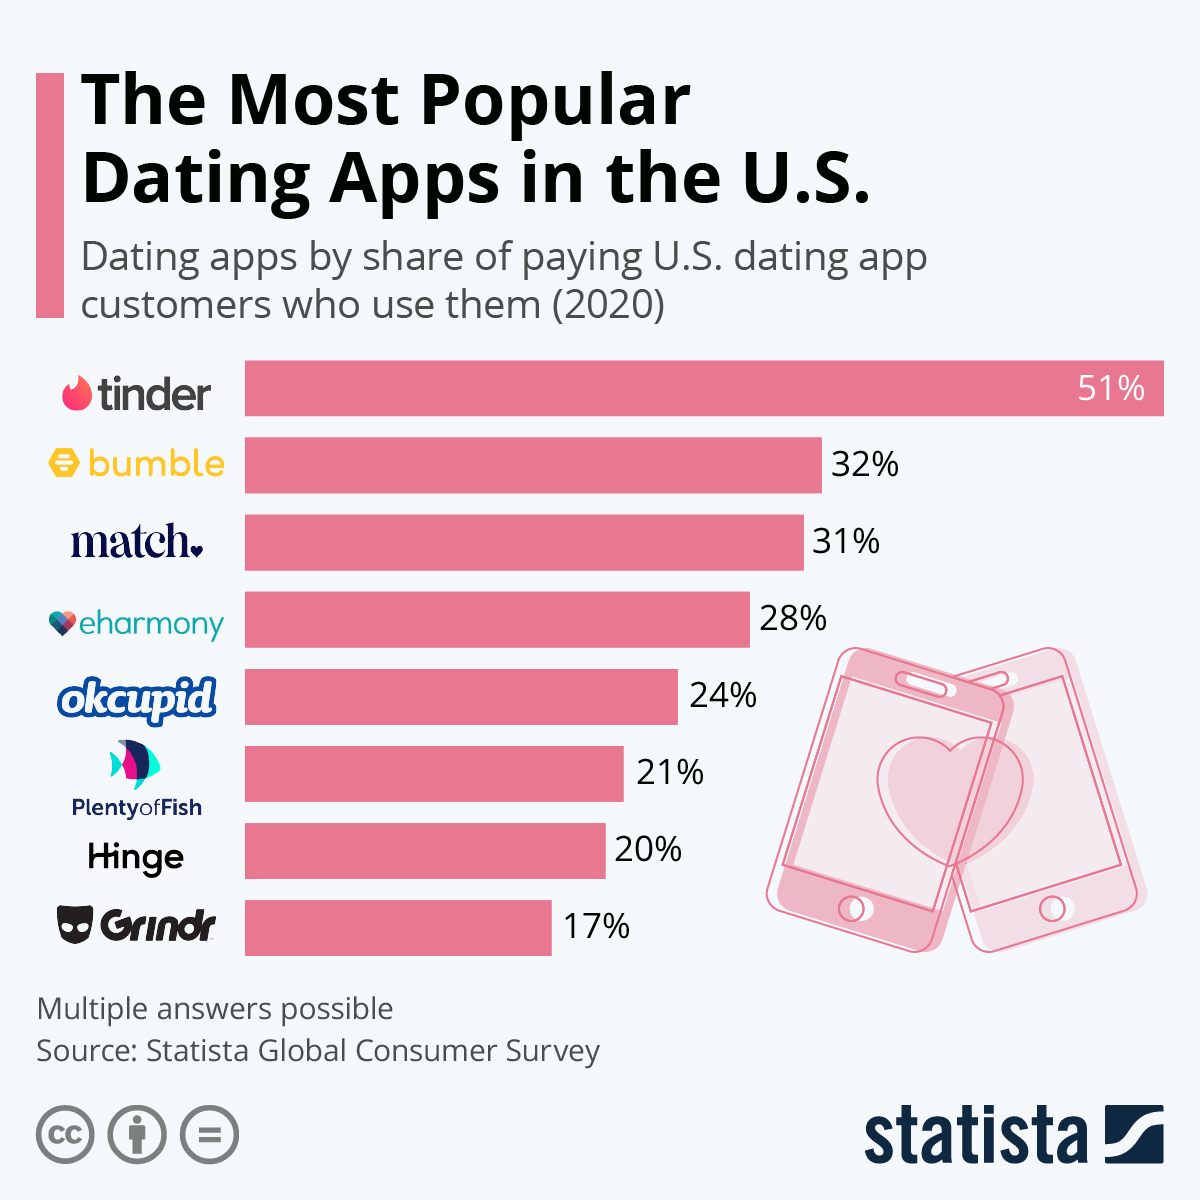 What is the most popular dating app?